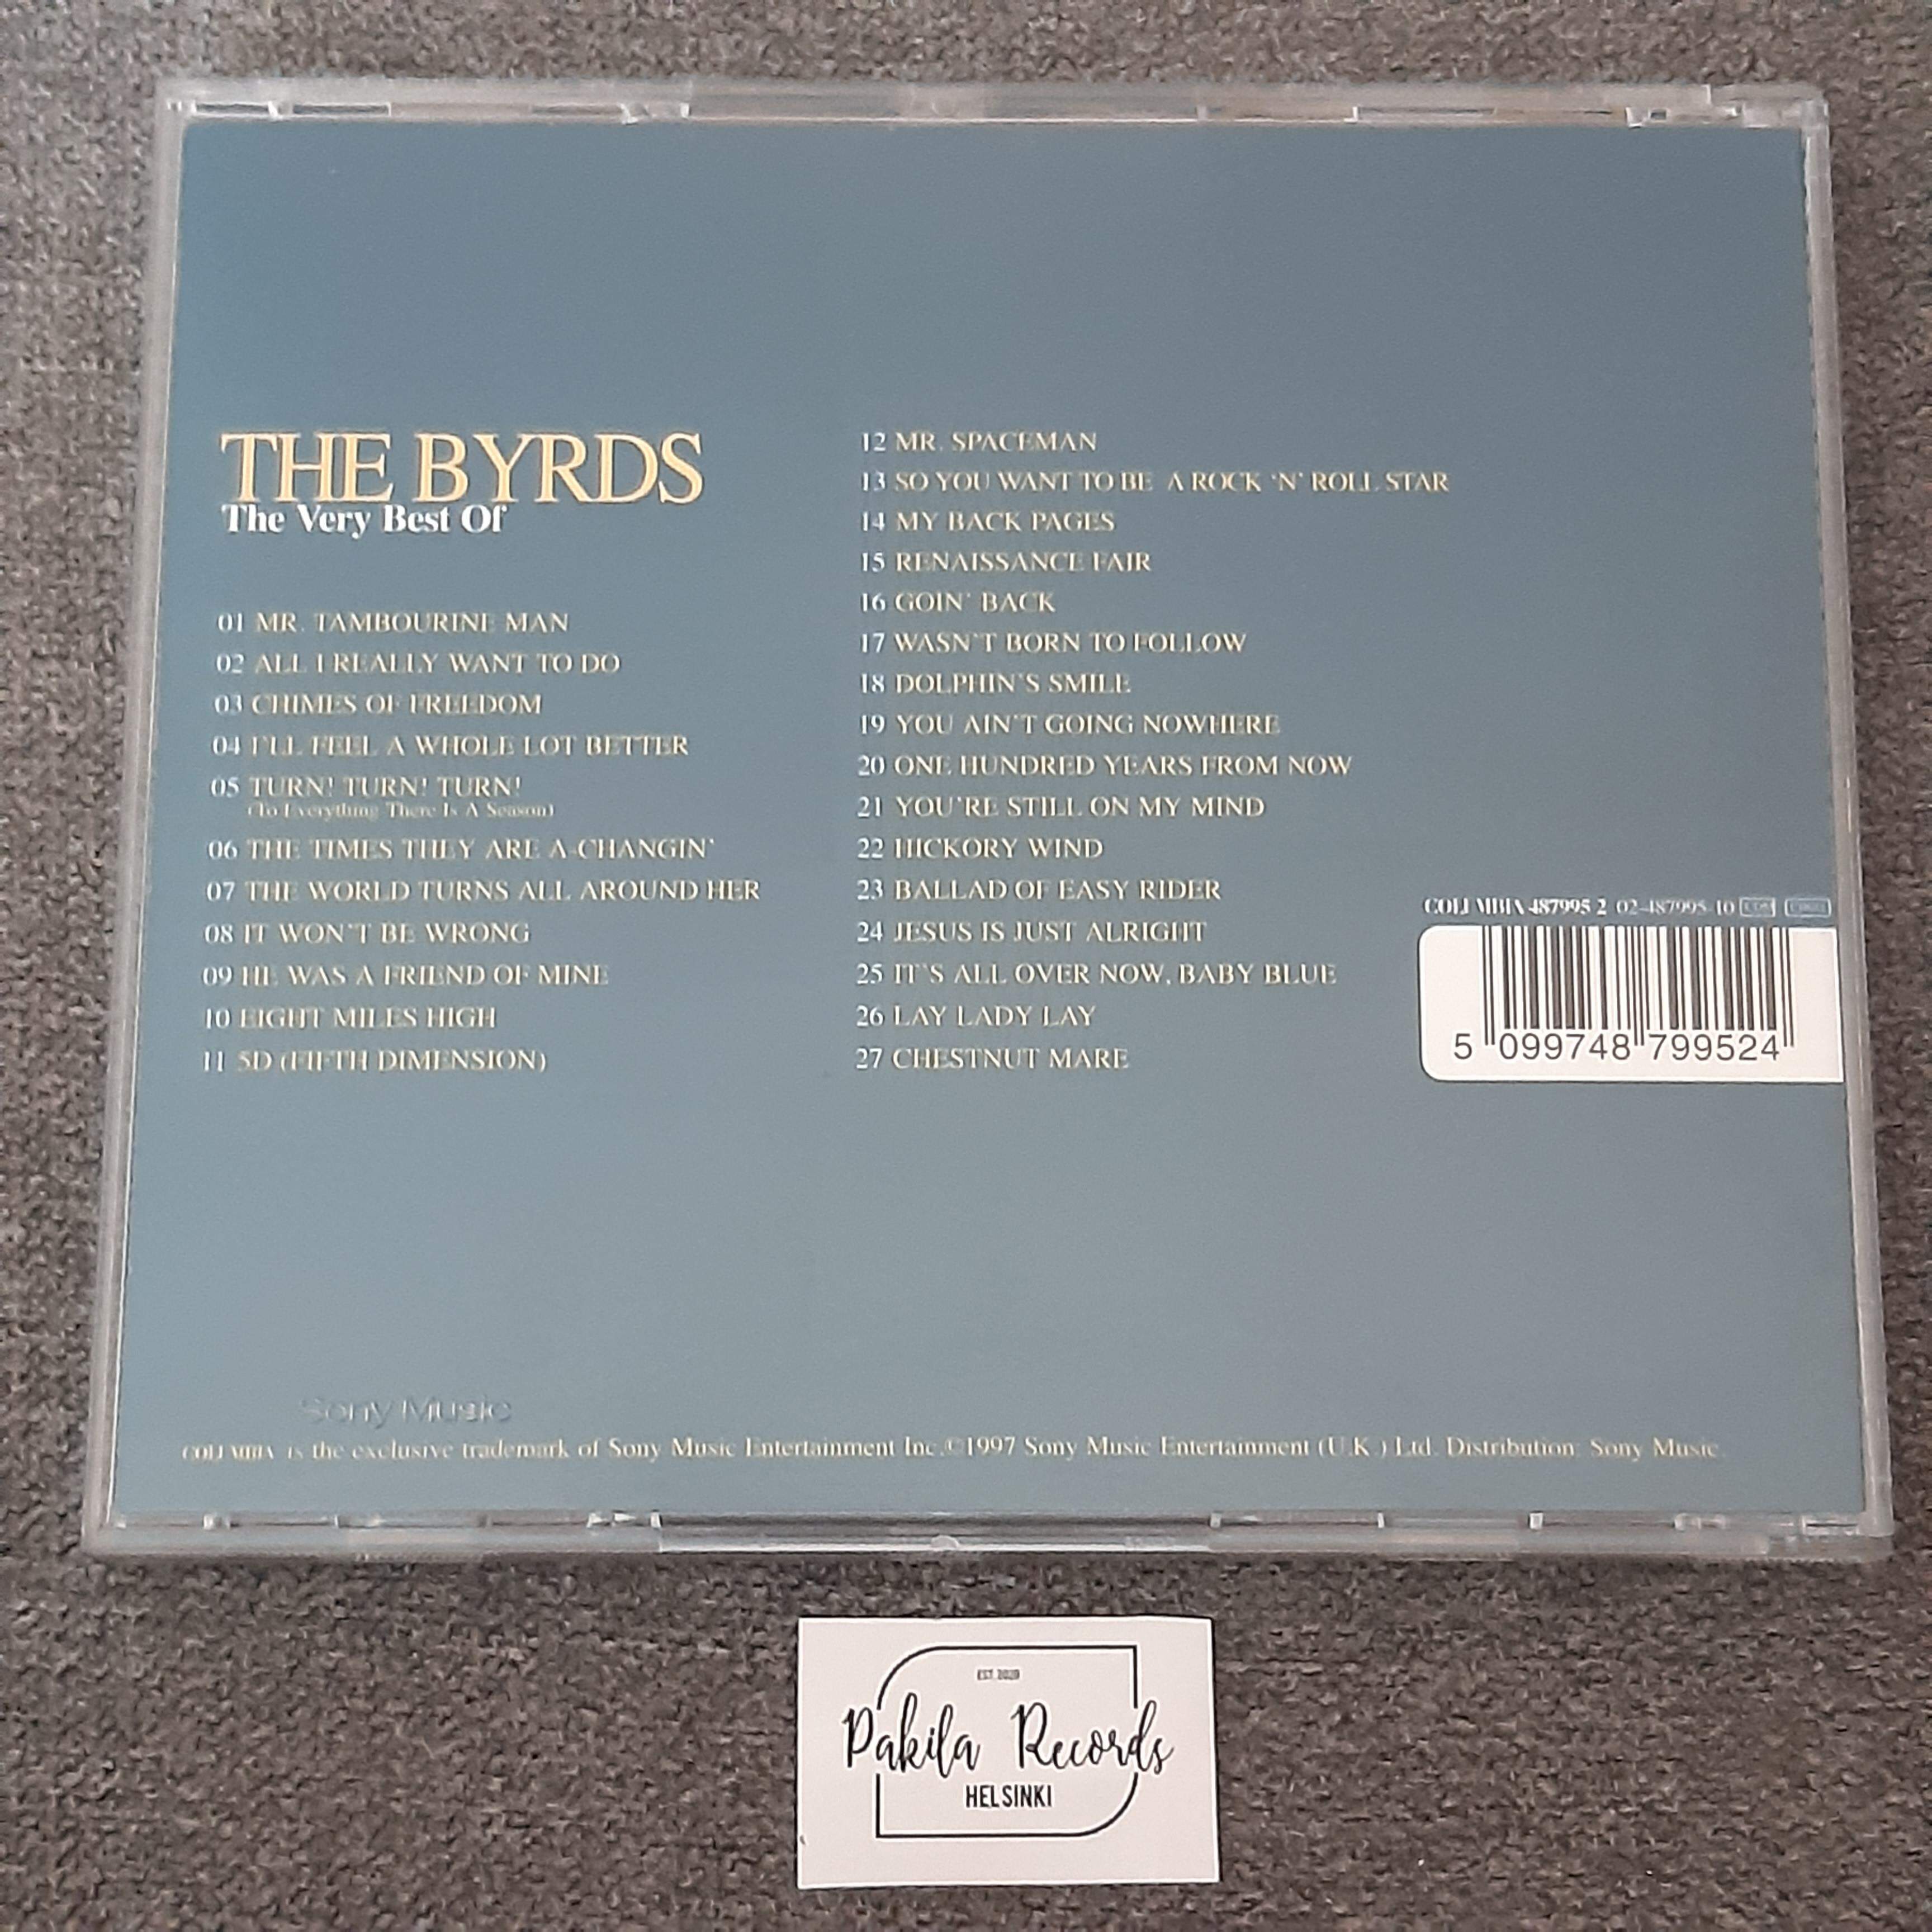 The Byrds - The Very Best Of - CD (käytetty)